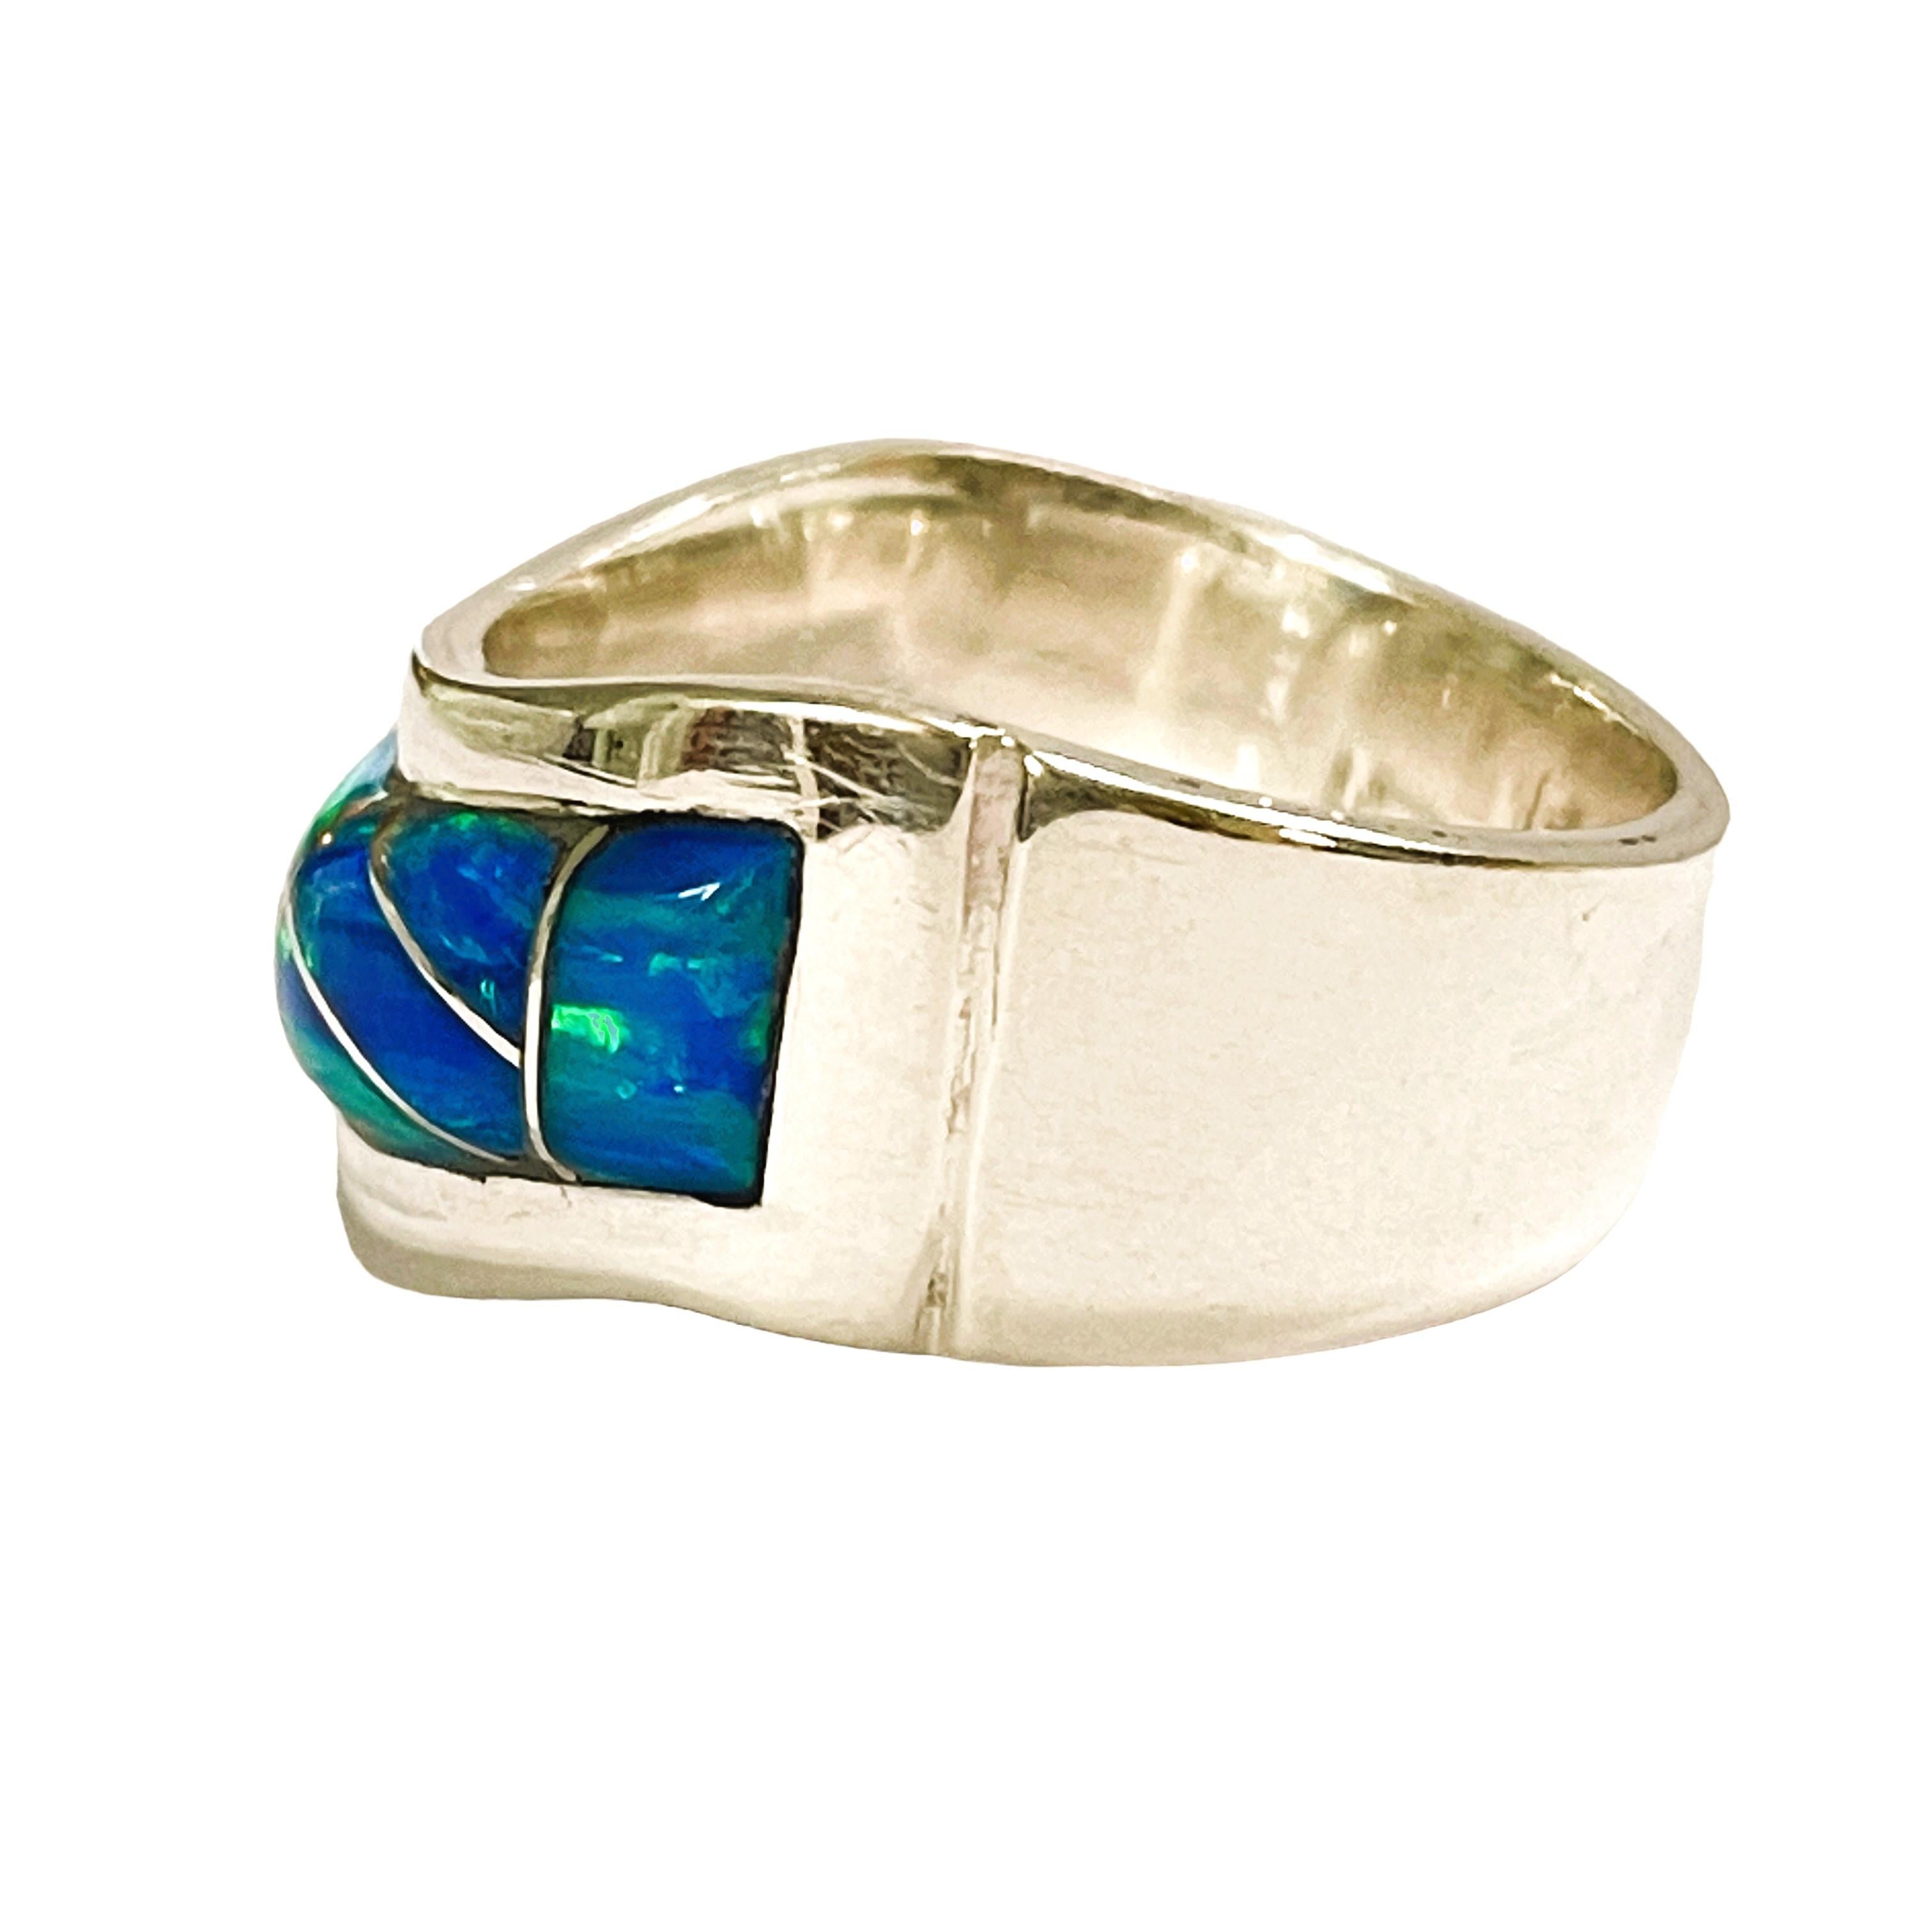 Art Deco Sterling Silver Inlaid Opal Ring, Stamped by Designer